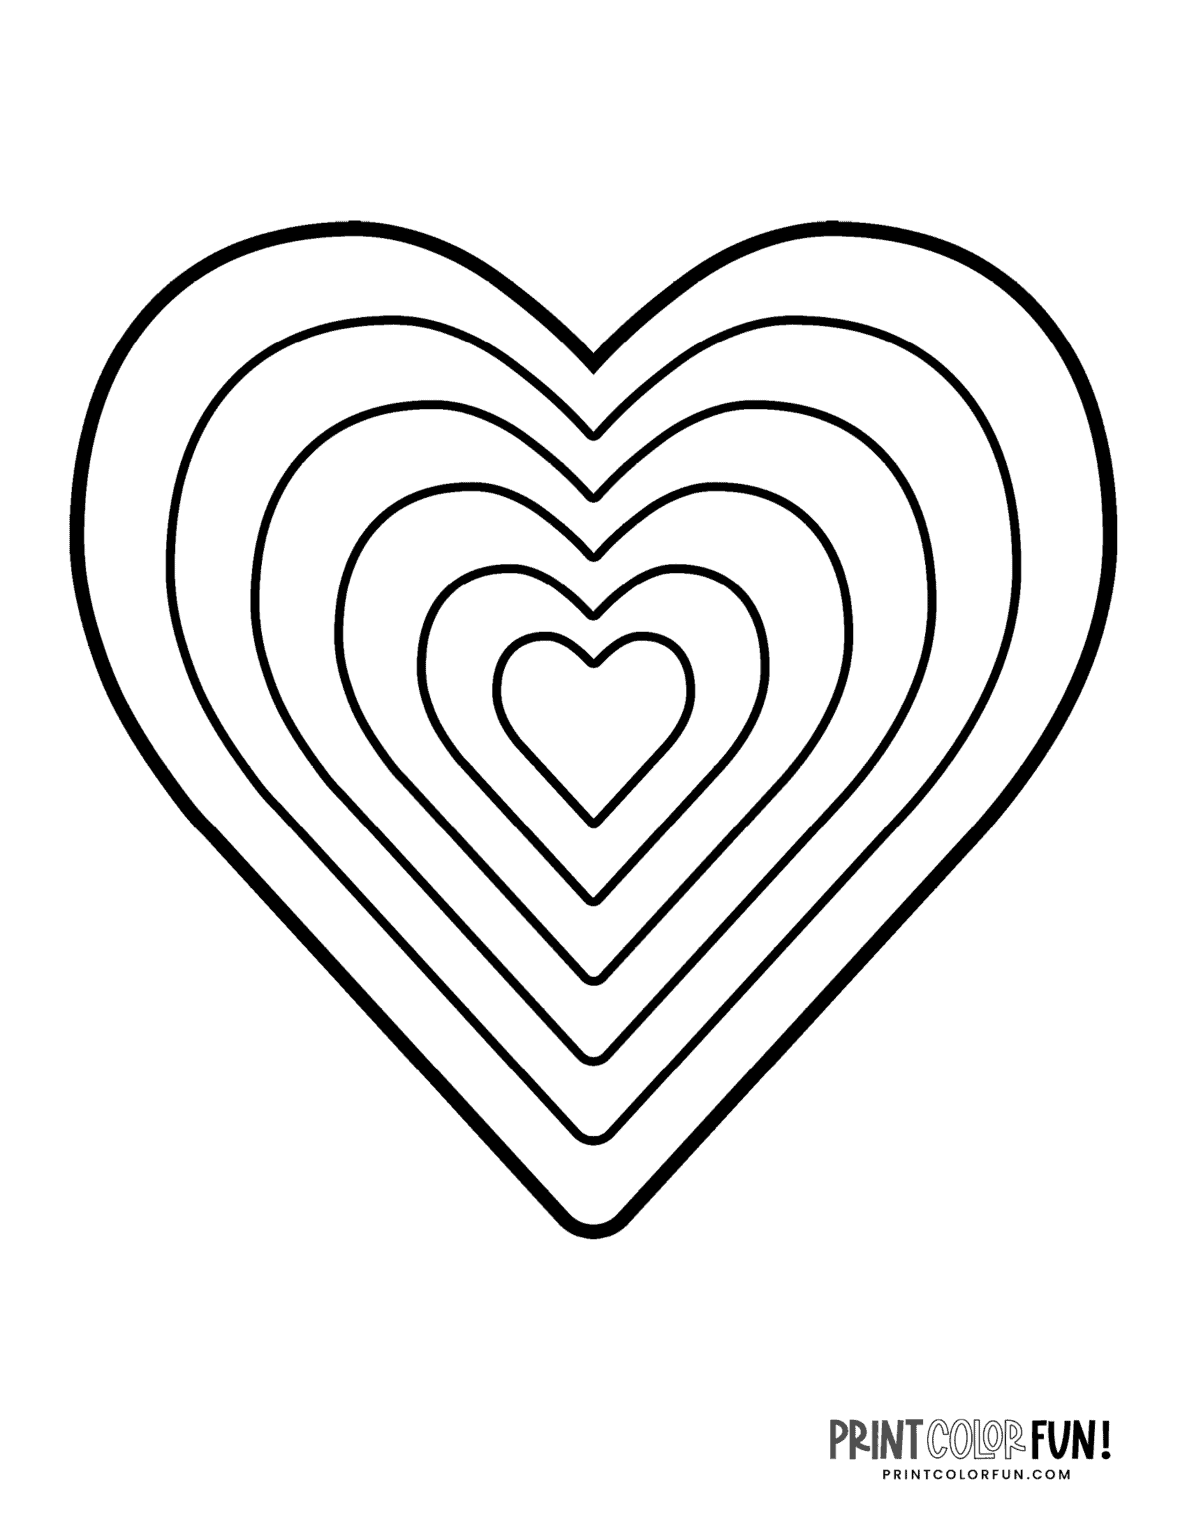 heart coloring pages free printable Hearts printable coloring pages